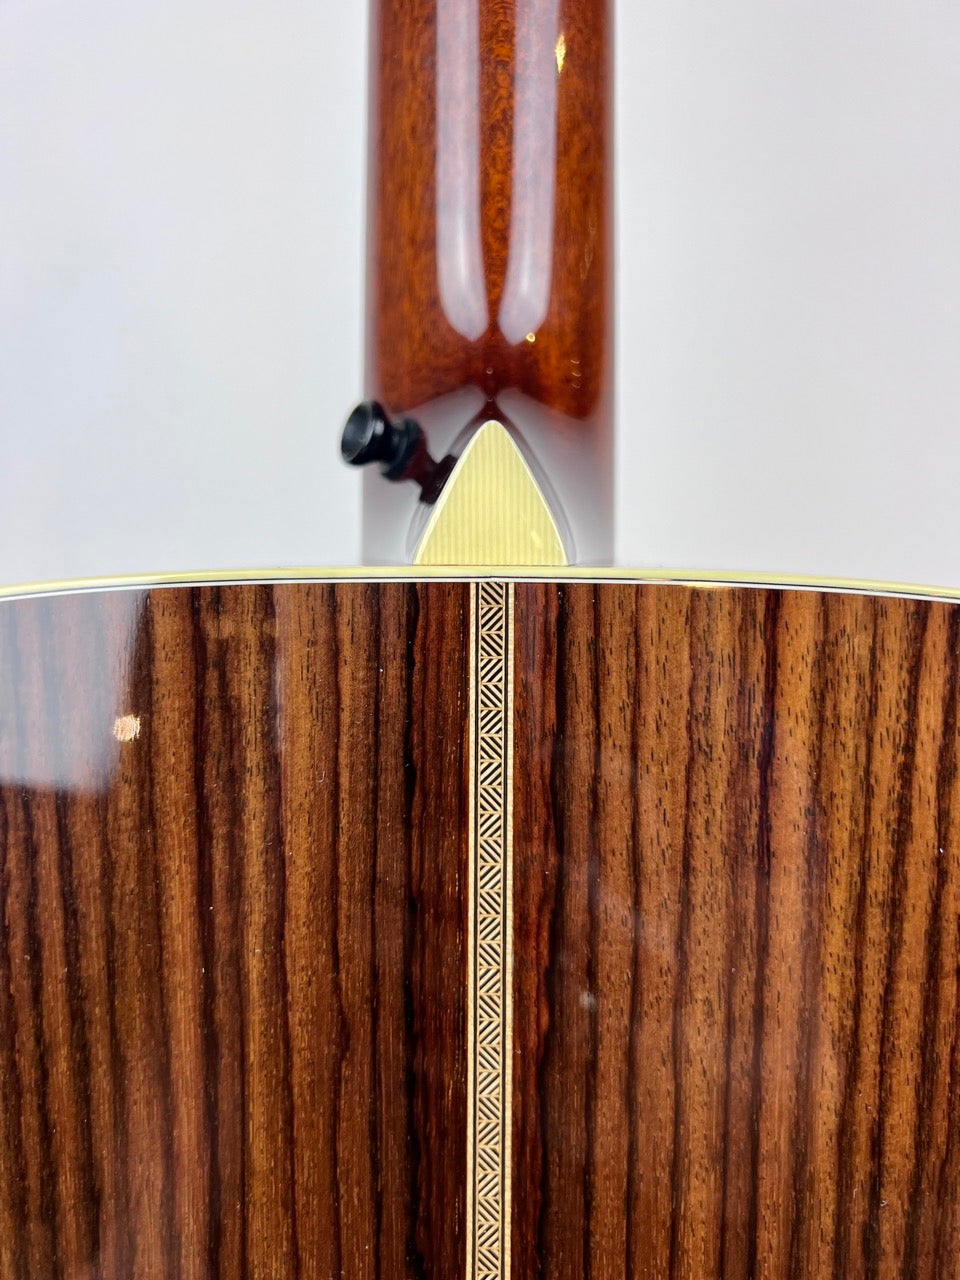 2018 Collings OM2HT Baked Top